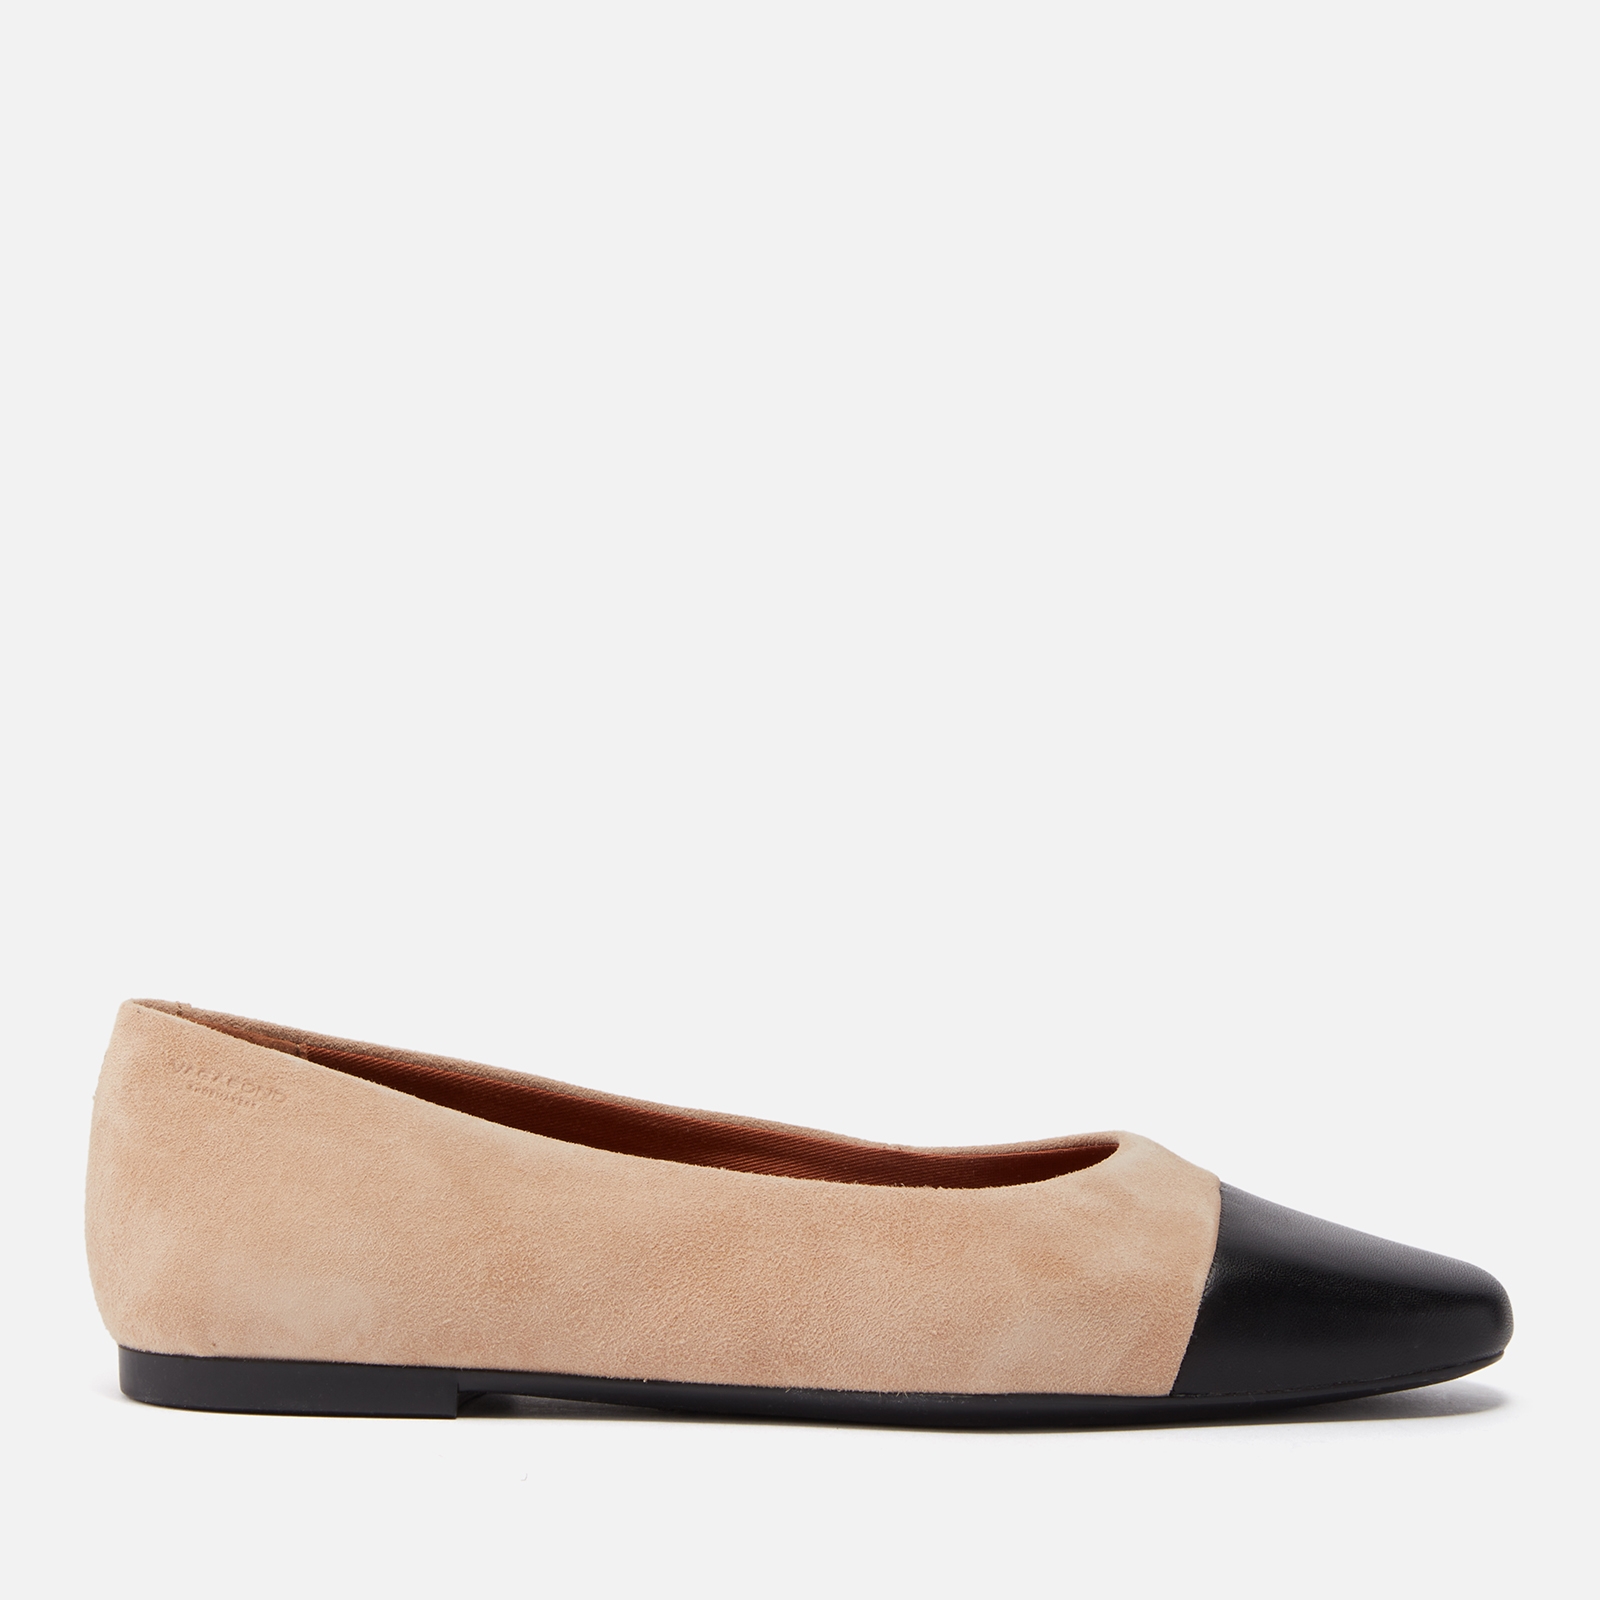 Vagabond Women’s Jolin Suede and Leather Ballet Flats